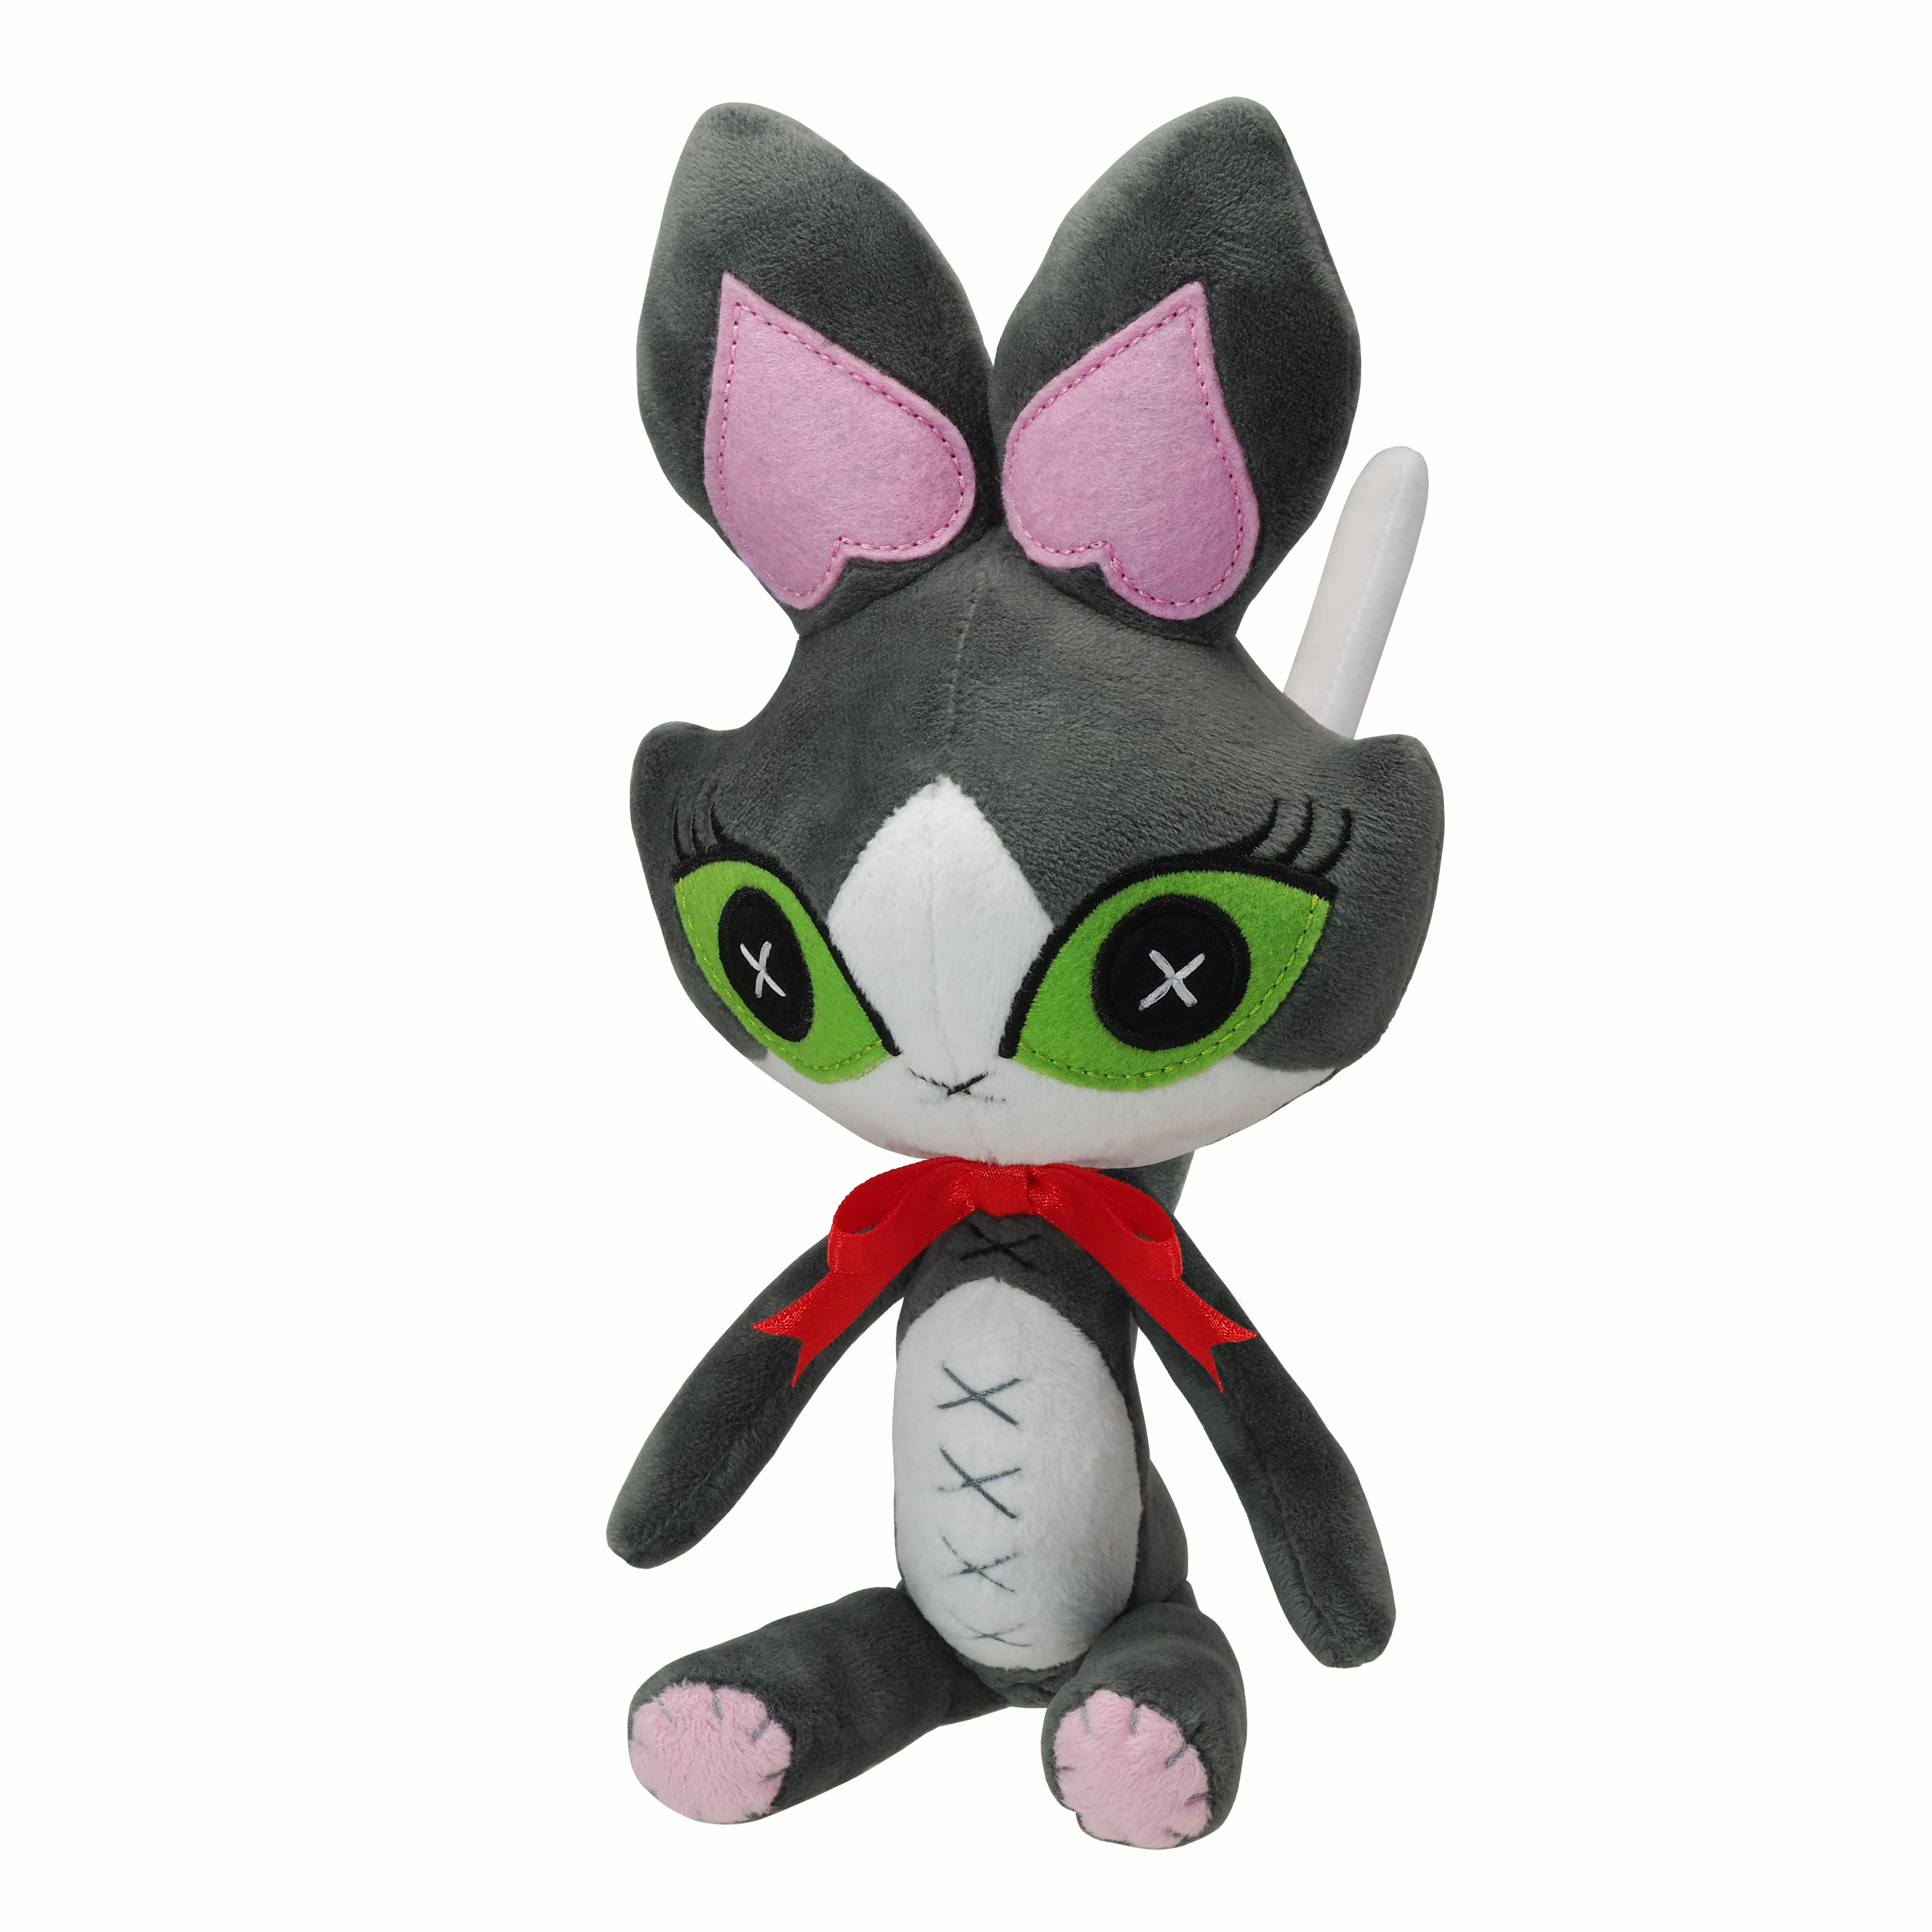 The lovely Wind-up Cait Sith Doll can now be your very own minion with this...